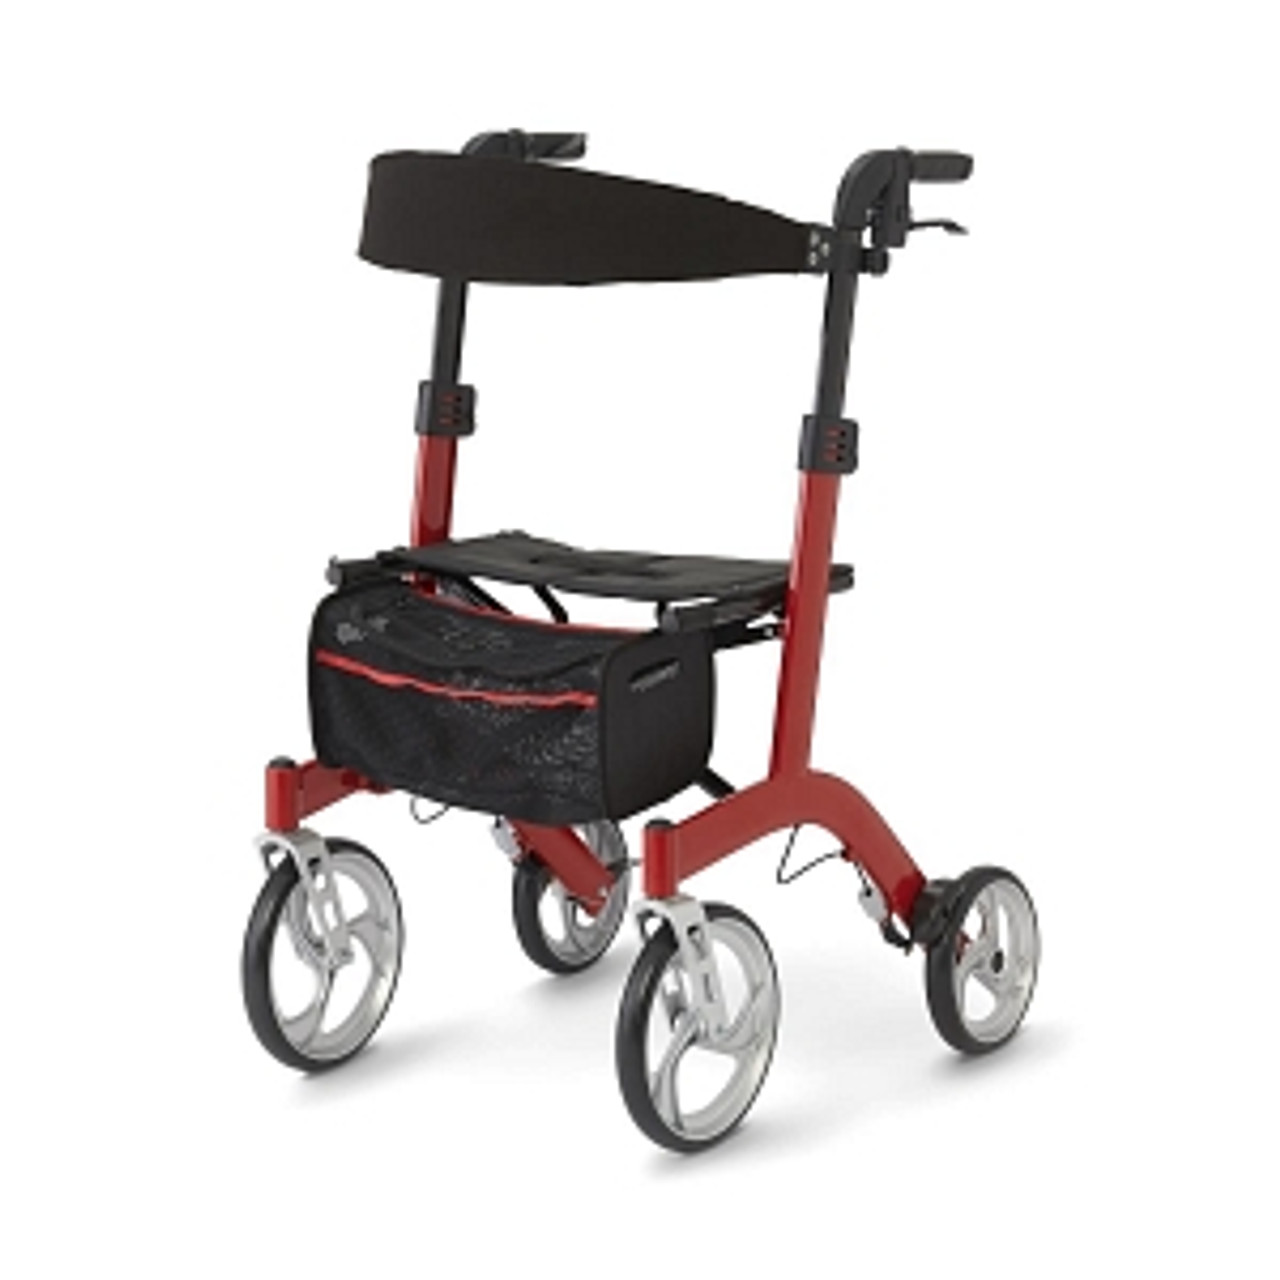 European-style rollators feature a lightweight aluminum frame
Fold horizontally for easy storage
300 lb. weight capacity
Storage bag included